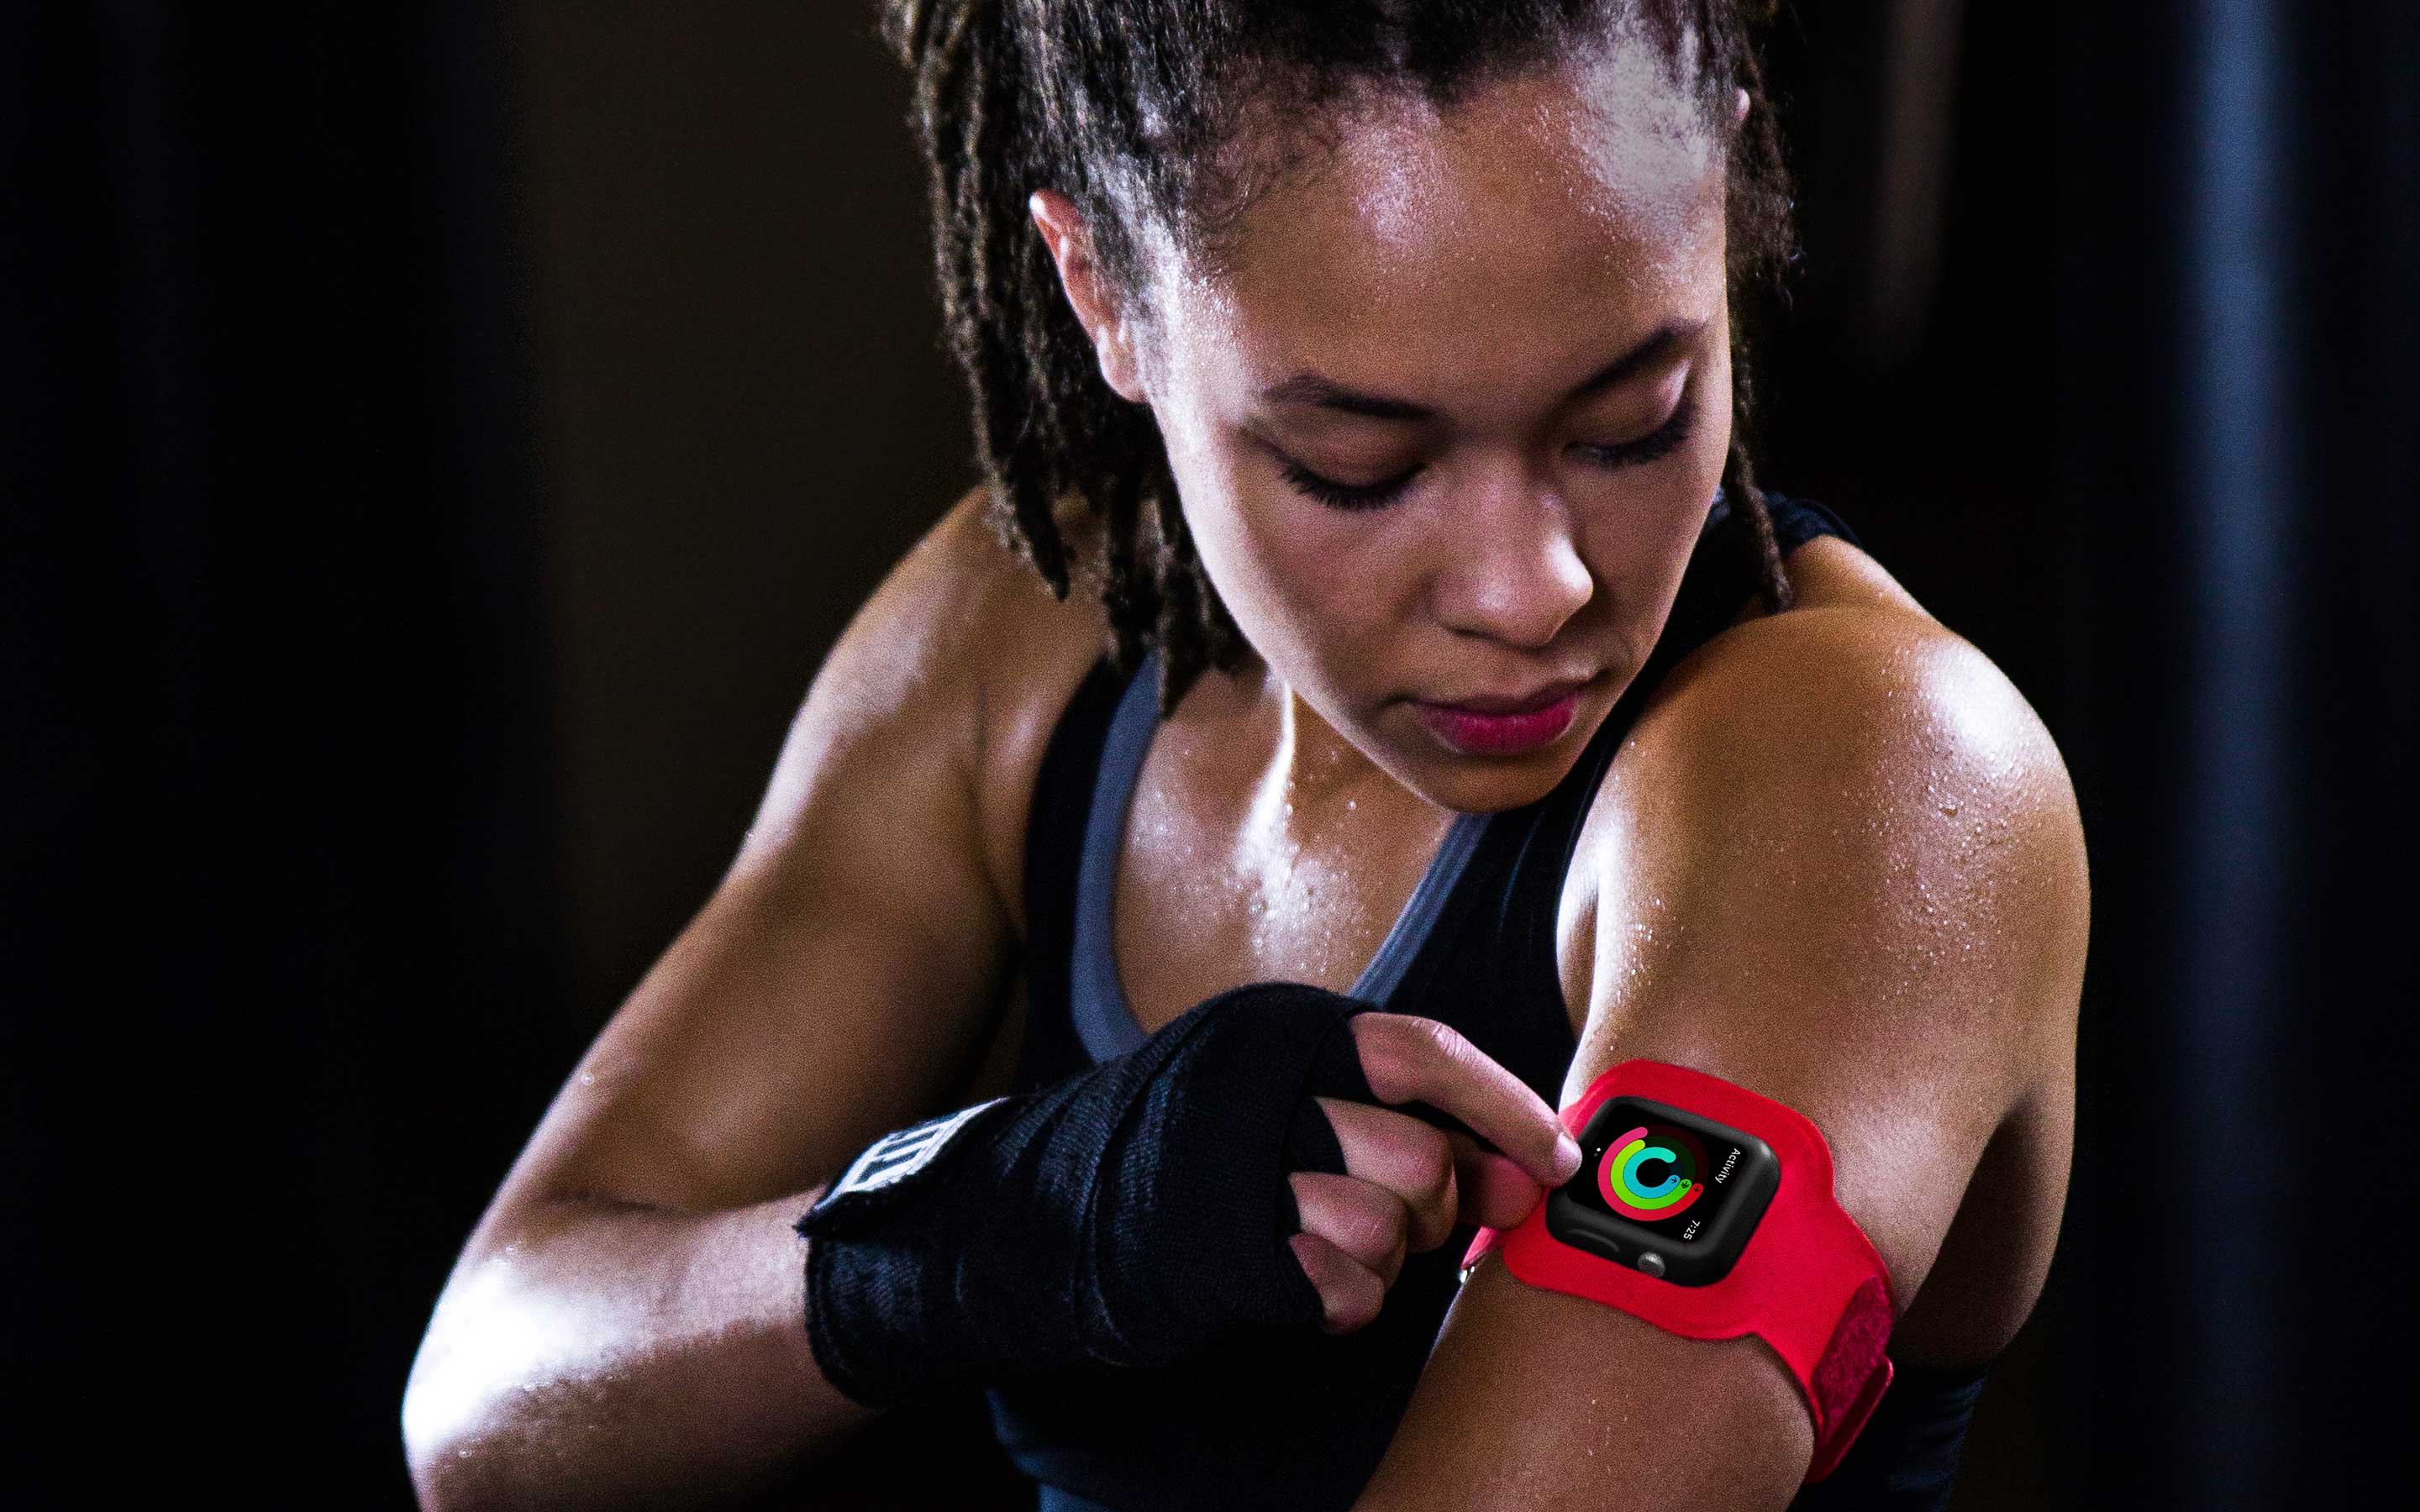 TwelveSouth's ActionSleeve Straps the Apple Watch To Your Arm for Intense Workouts